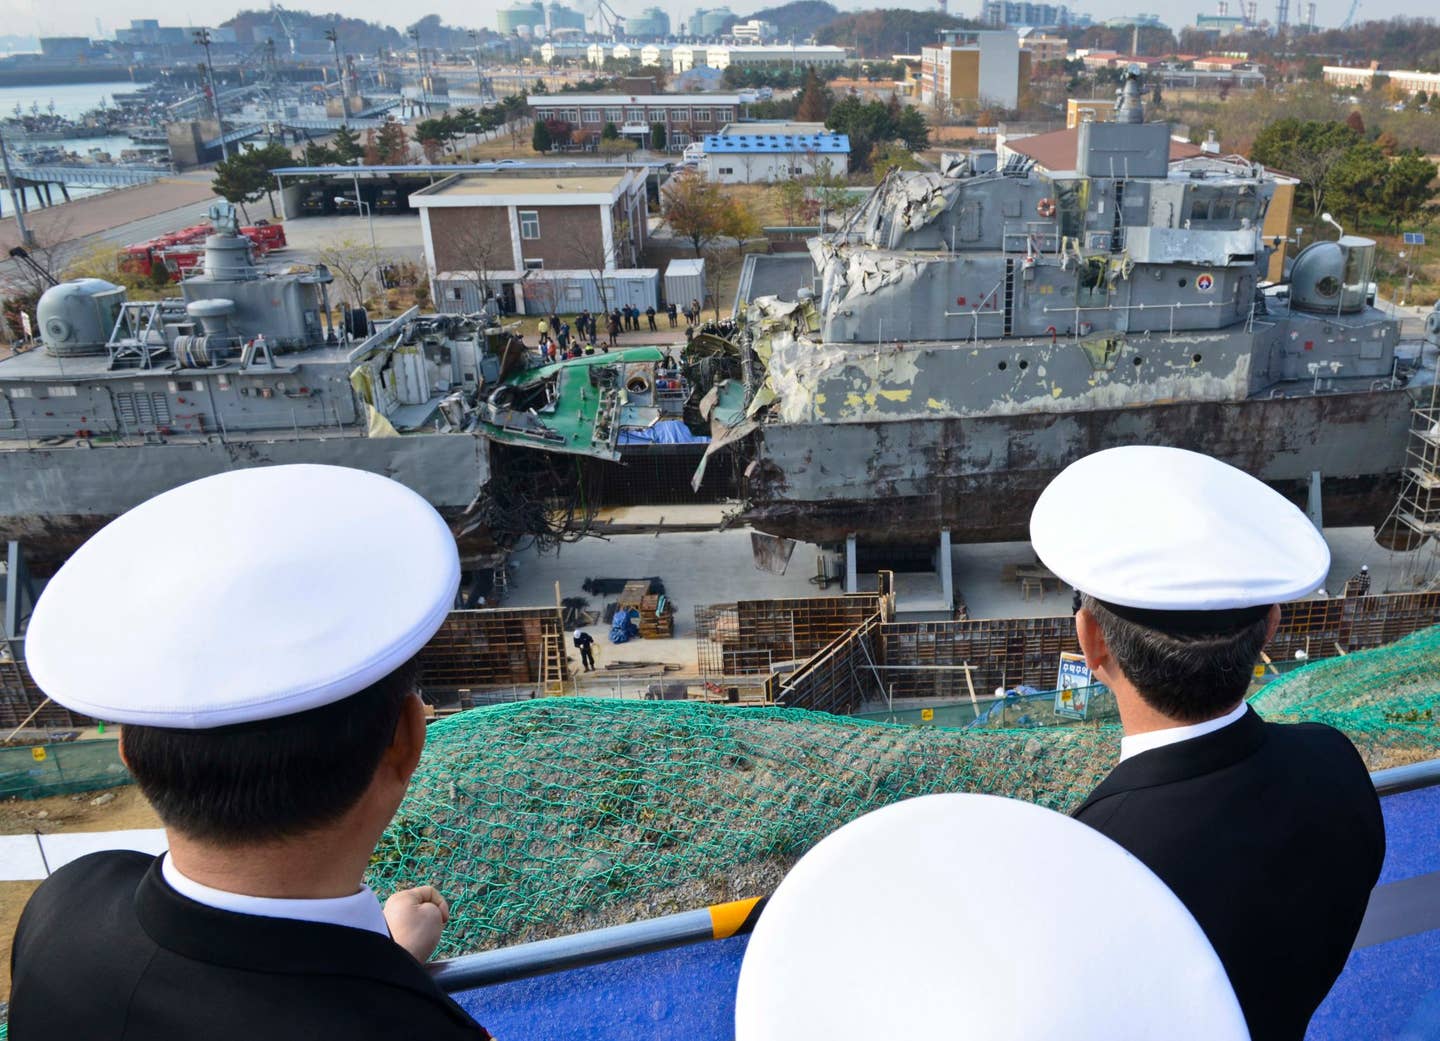 Adm. Harry B. Harris Jr., commander of U.S. Pacific Fleet, and Rear Adm. Lisa Franchetti, commander of U.S. Naval Forces Korea, and Rear Adm. Park Sung-bae, commander of the Republic of Korea Navy Second Fleet, tour the ROKS Pohang-class corvette Cheonan that was sunk by a North Korean torpedo on March 26, 2010. (U.S. Navy photo by Mass Communication Specialist 1st Class Joshua Bryce Bruns)